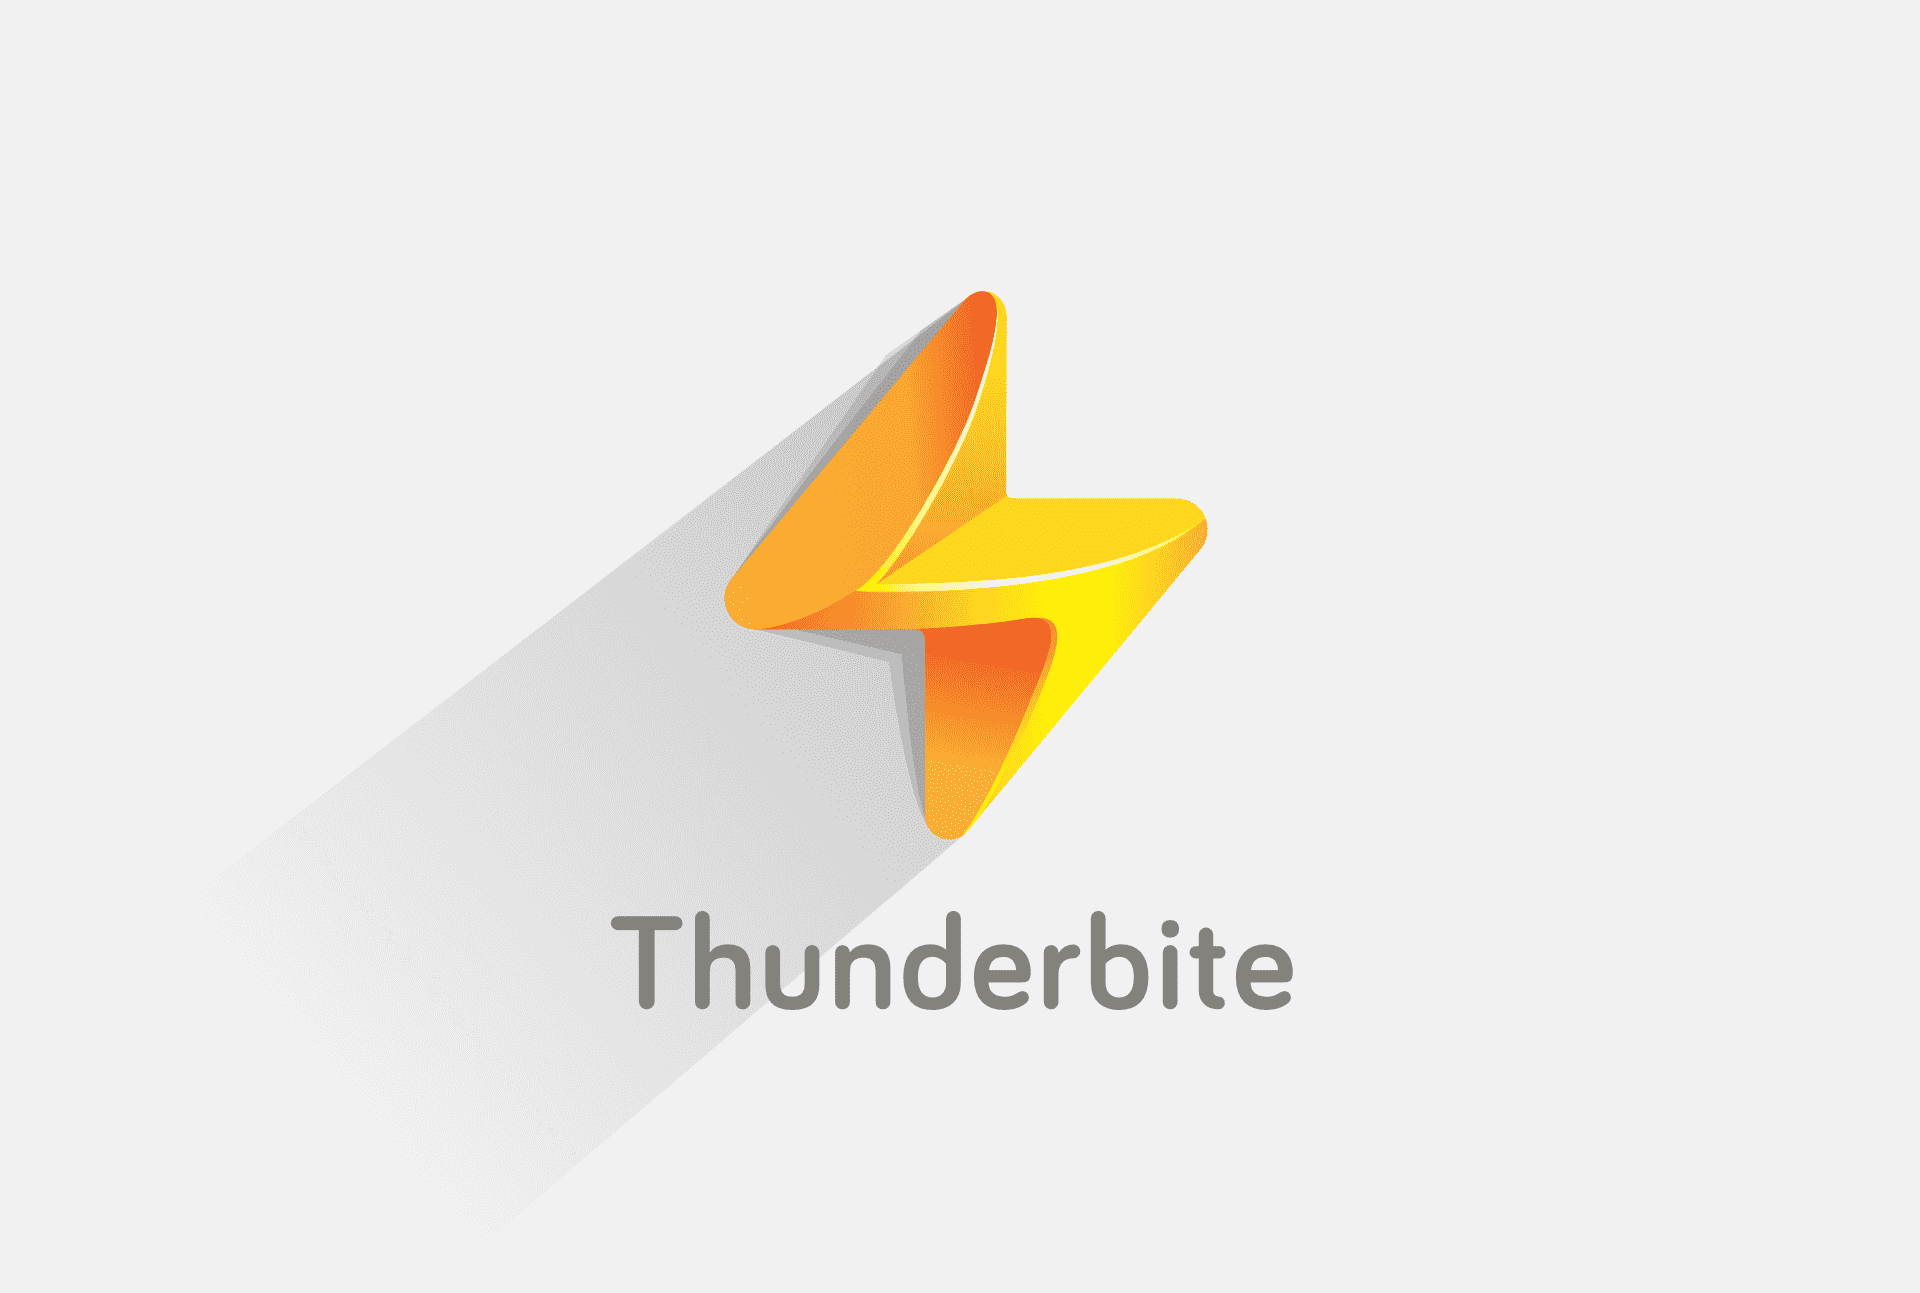 Thunderbite agrees to contract extension with Boyle Sports